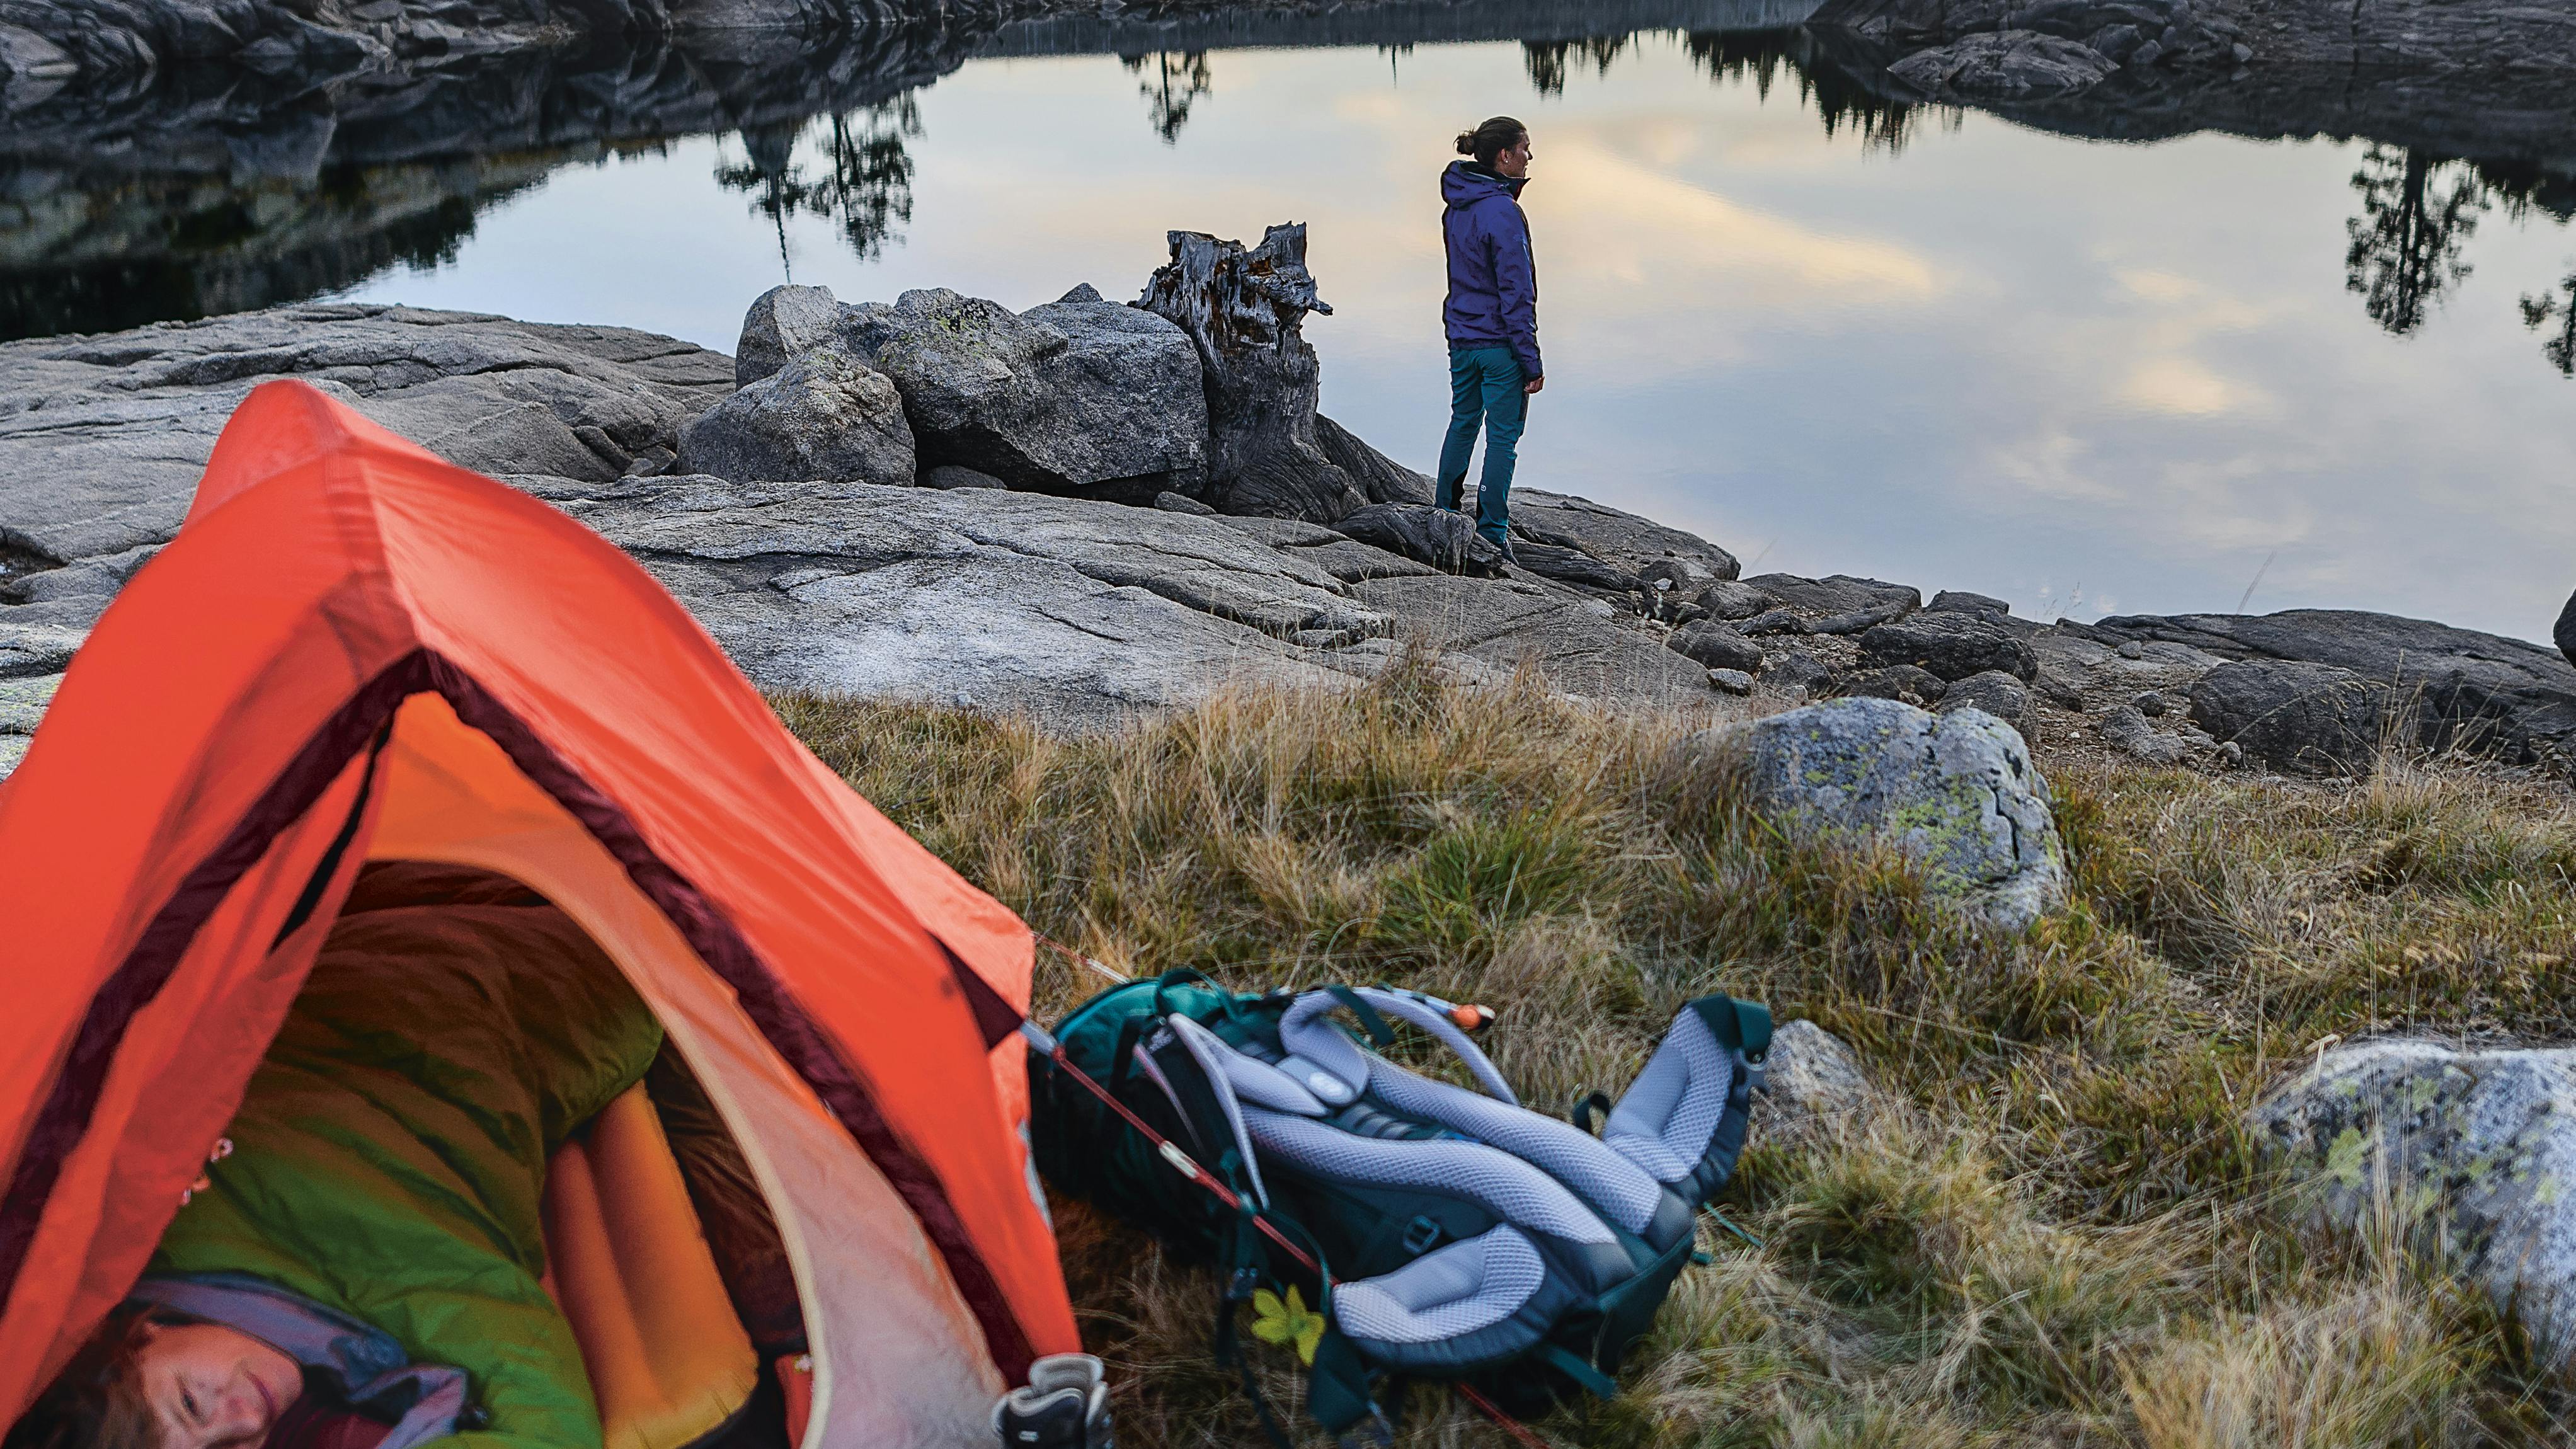 A camper standing by a lake while another camper cozies up in her sleeping bag in an orange one-person tent